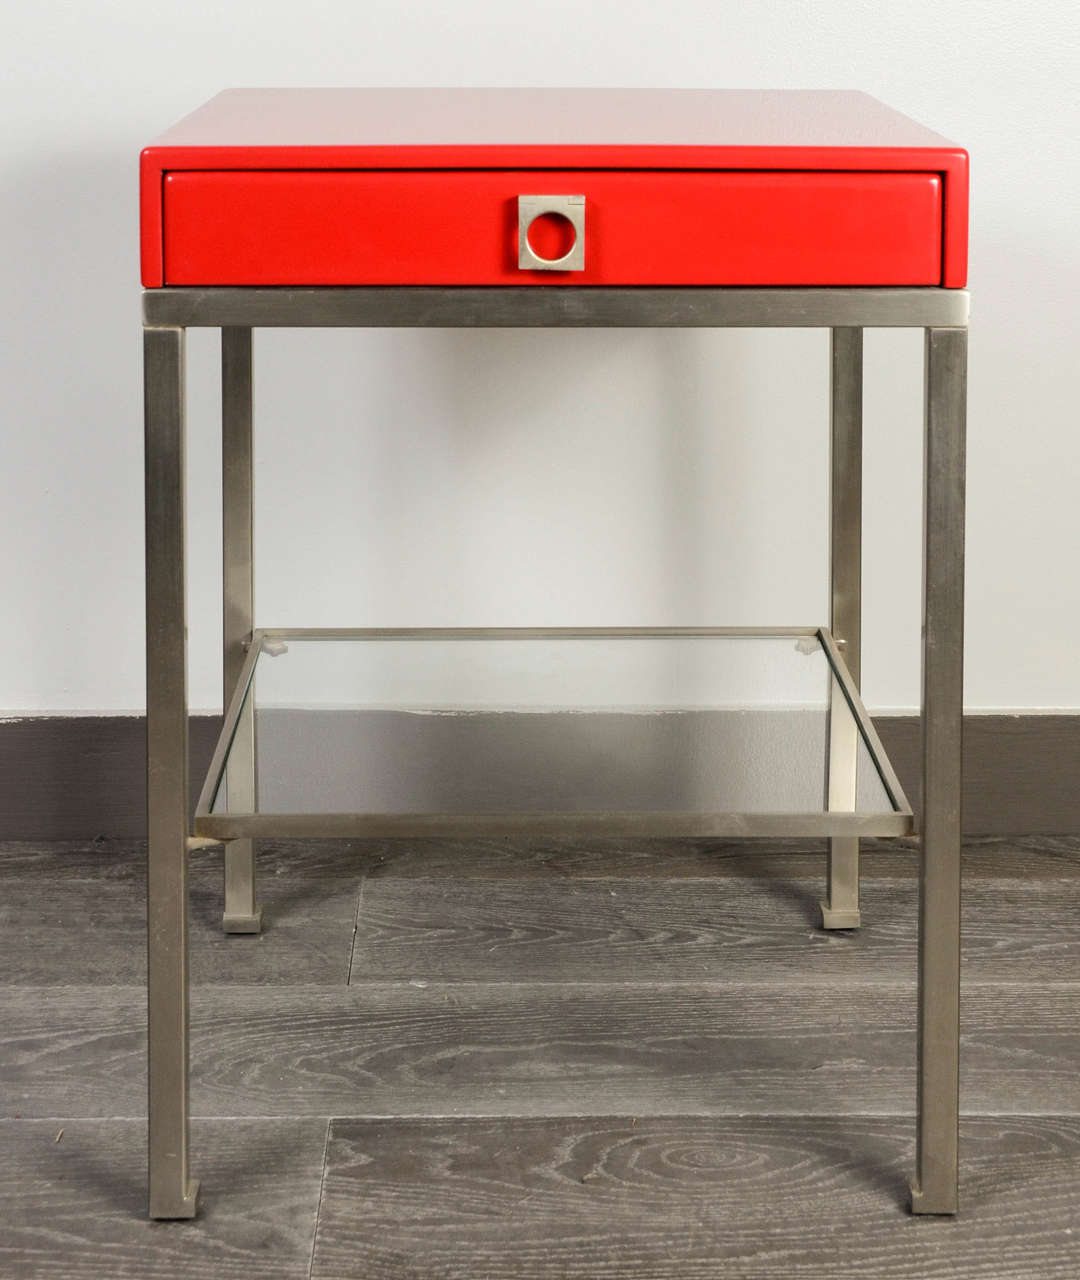 Elegant pair of side tables , base steel with a new red lacquer, glass shelf.<br />
By Guy Lefebvre.